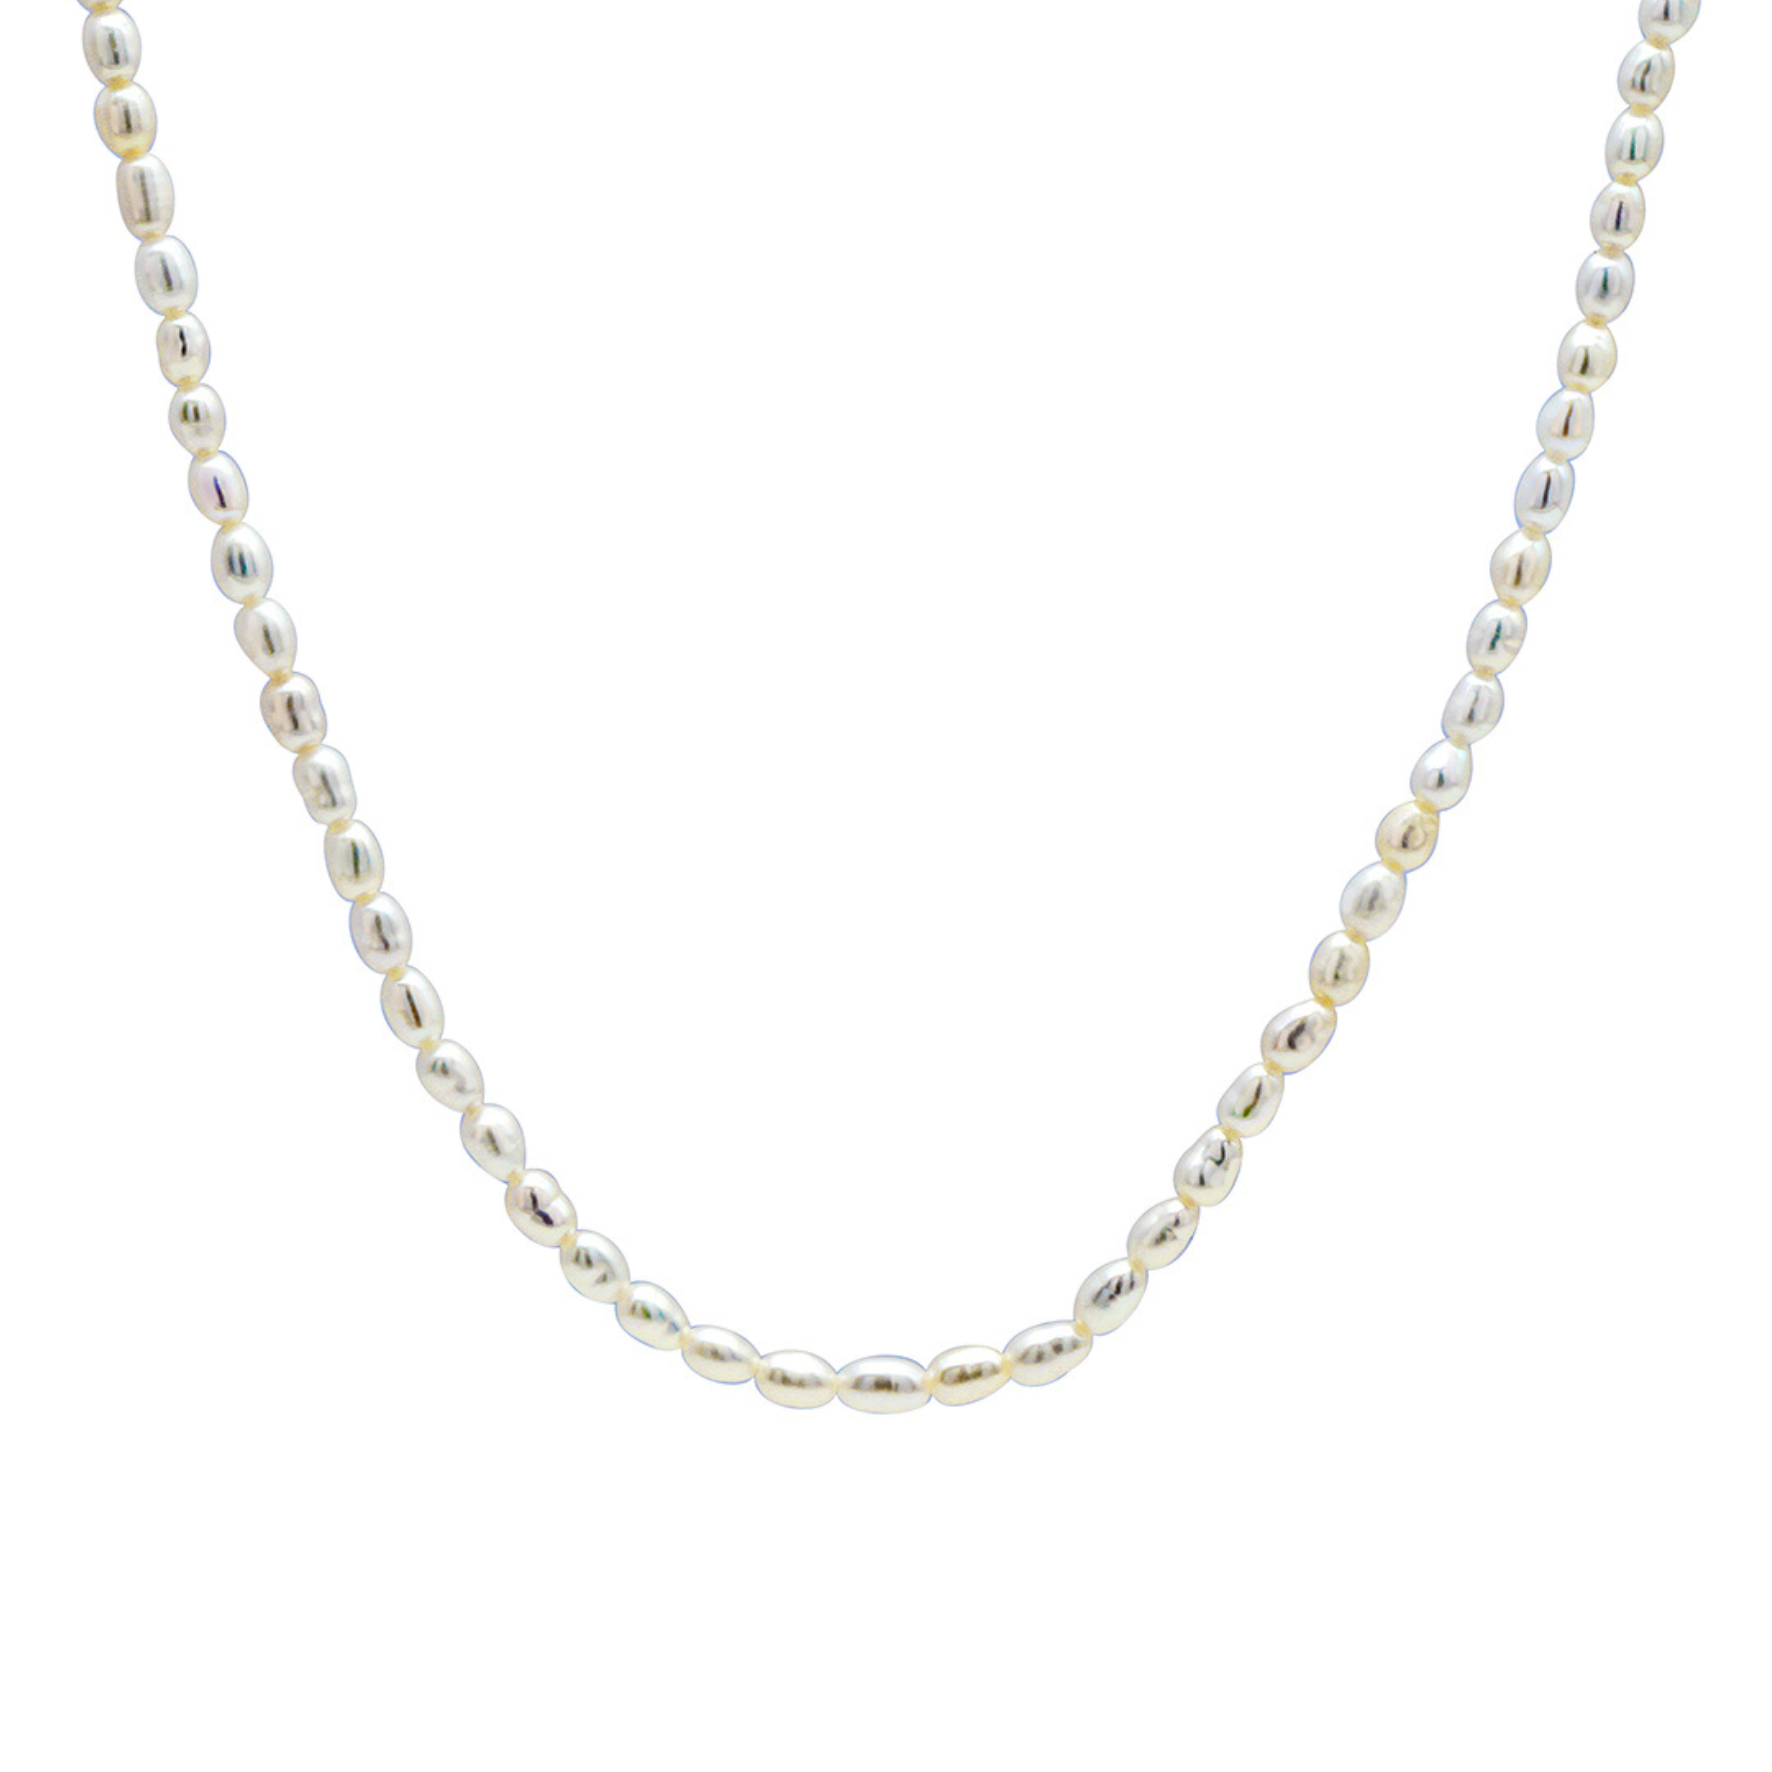 Michelle Pearl Necklace from A-Hjort Jewellery in Goldplated Silver Sterling 925